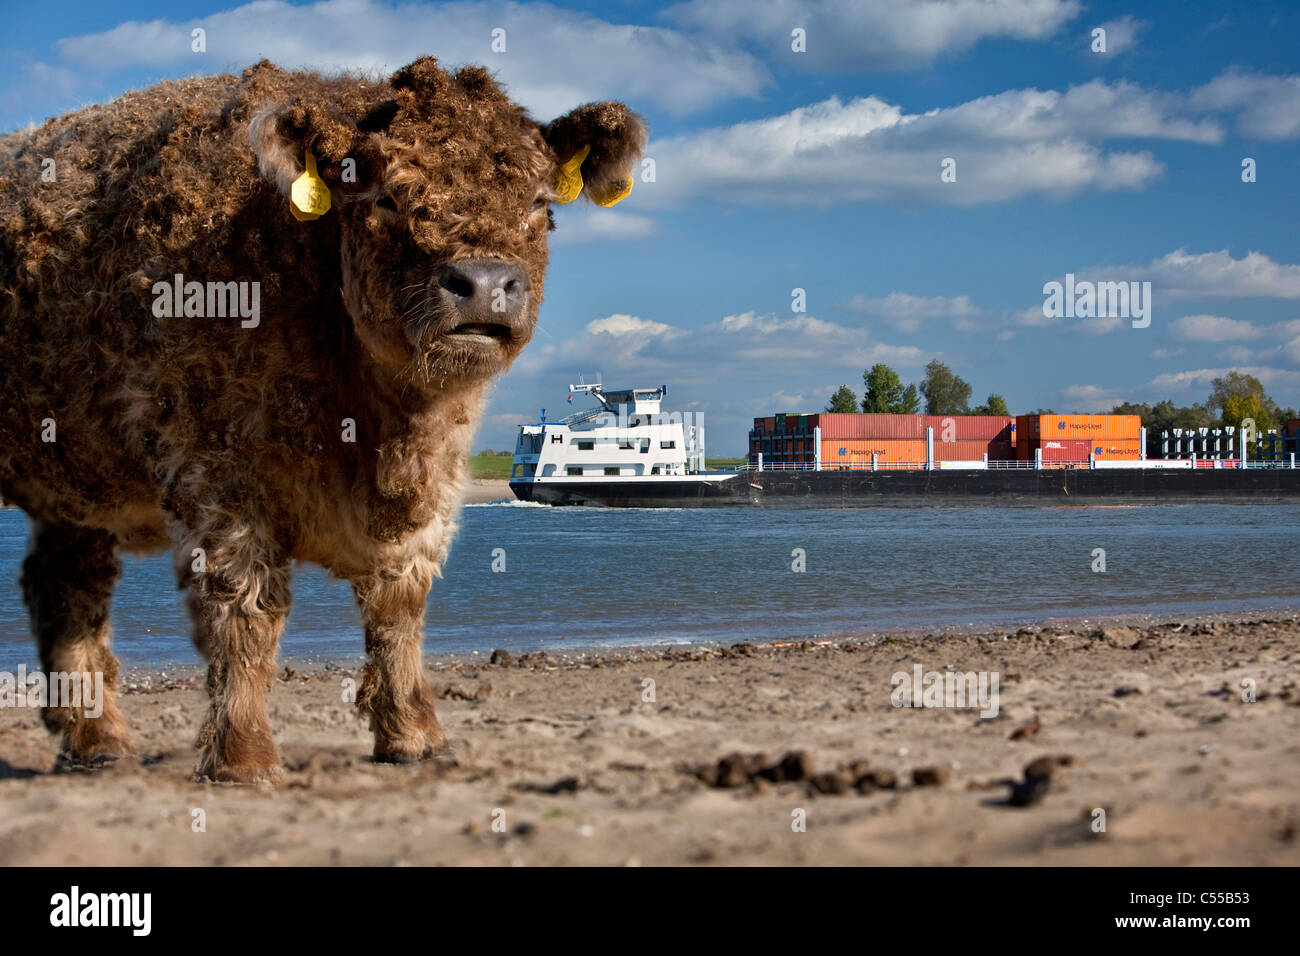 The Netherlands, Ooij, Ooij-polder. Galloway cow. Background: Cargo boat on Waal river. Stock Photo